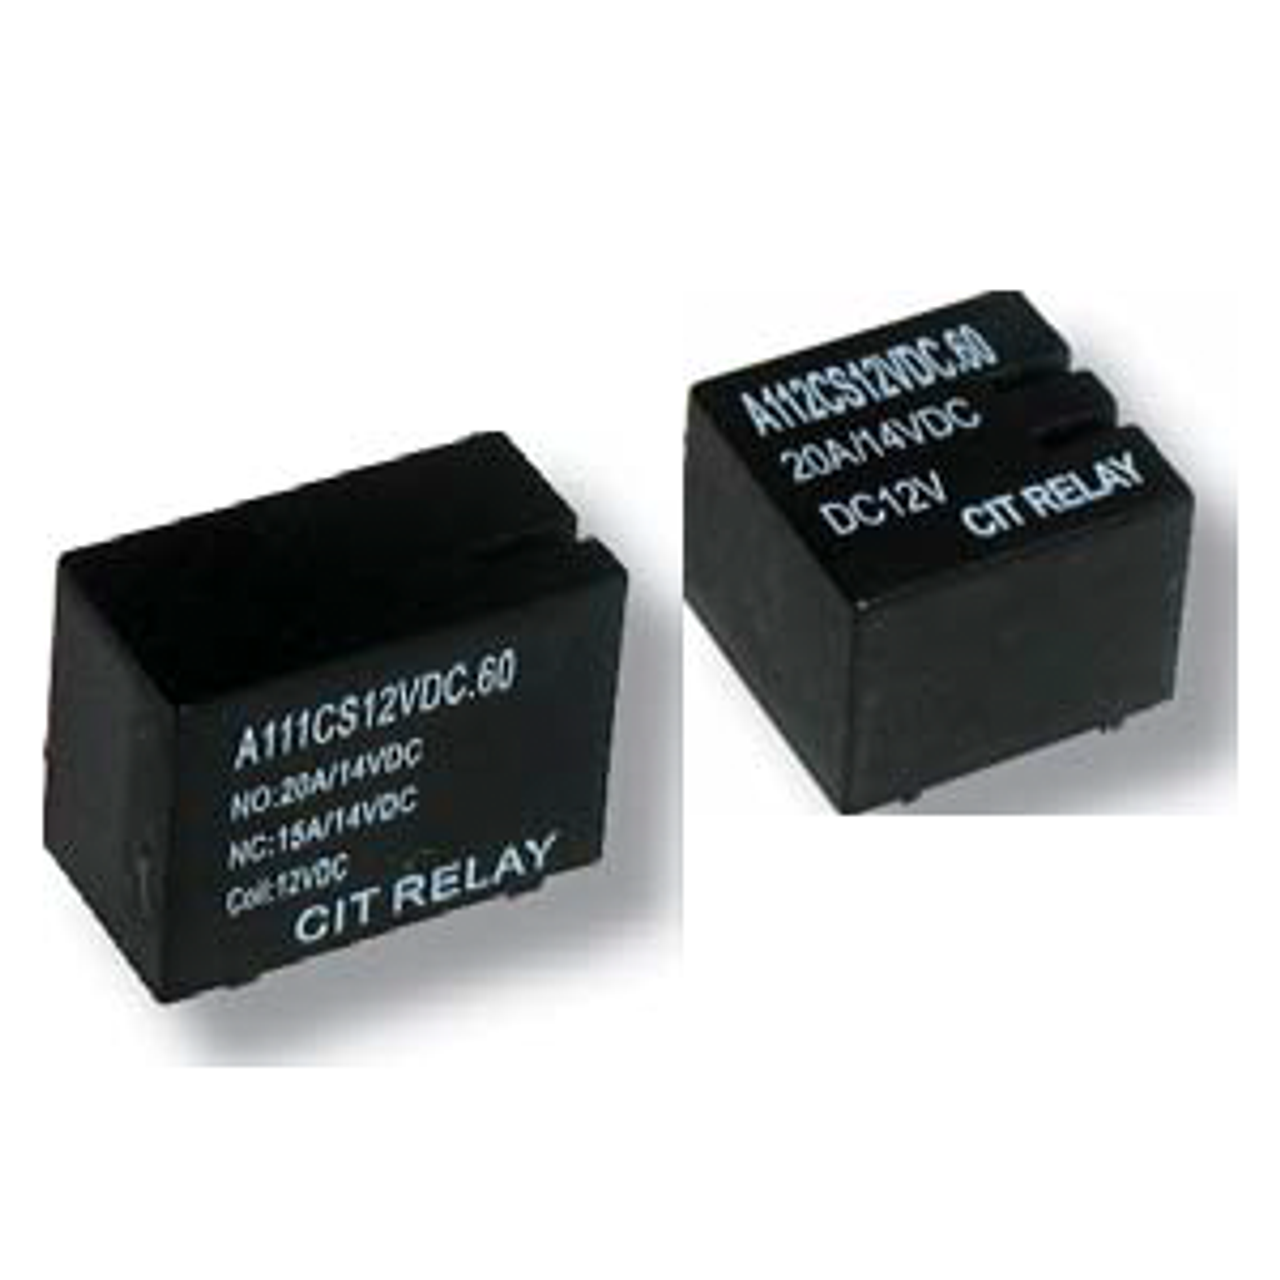 CIT Relay and Switch A112AS12VDC.80 Automotive Relays